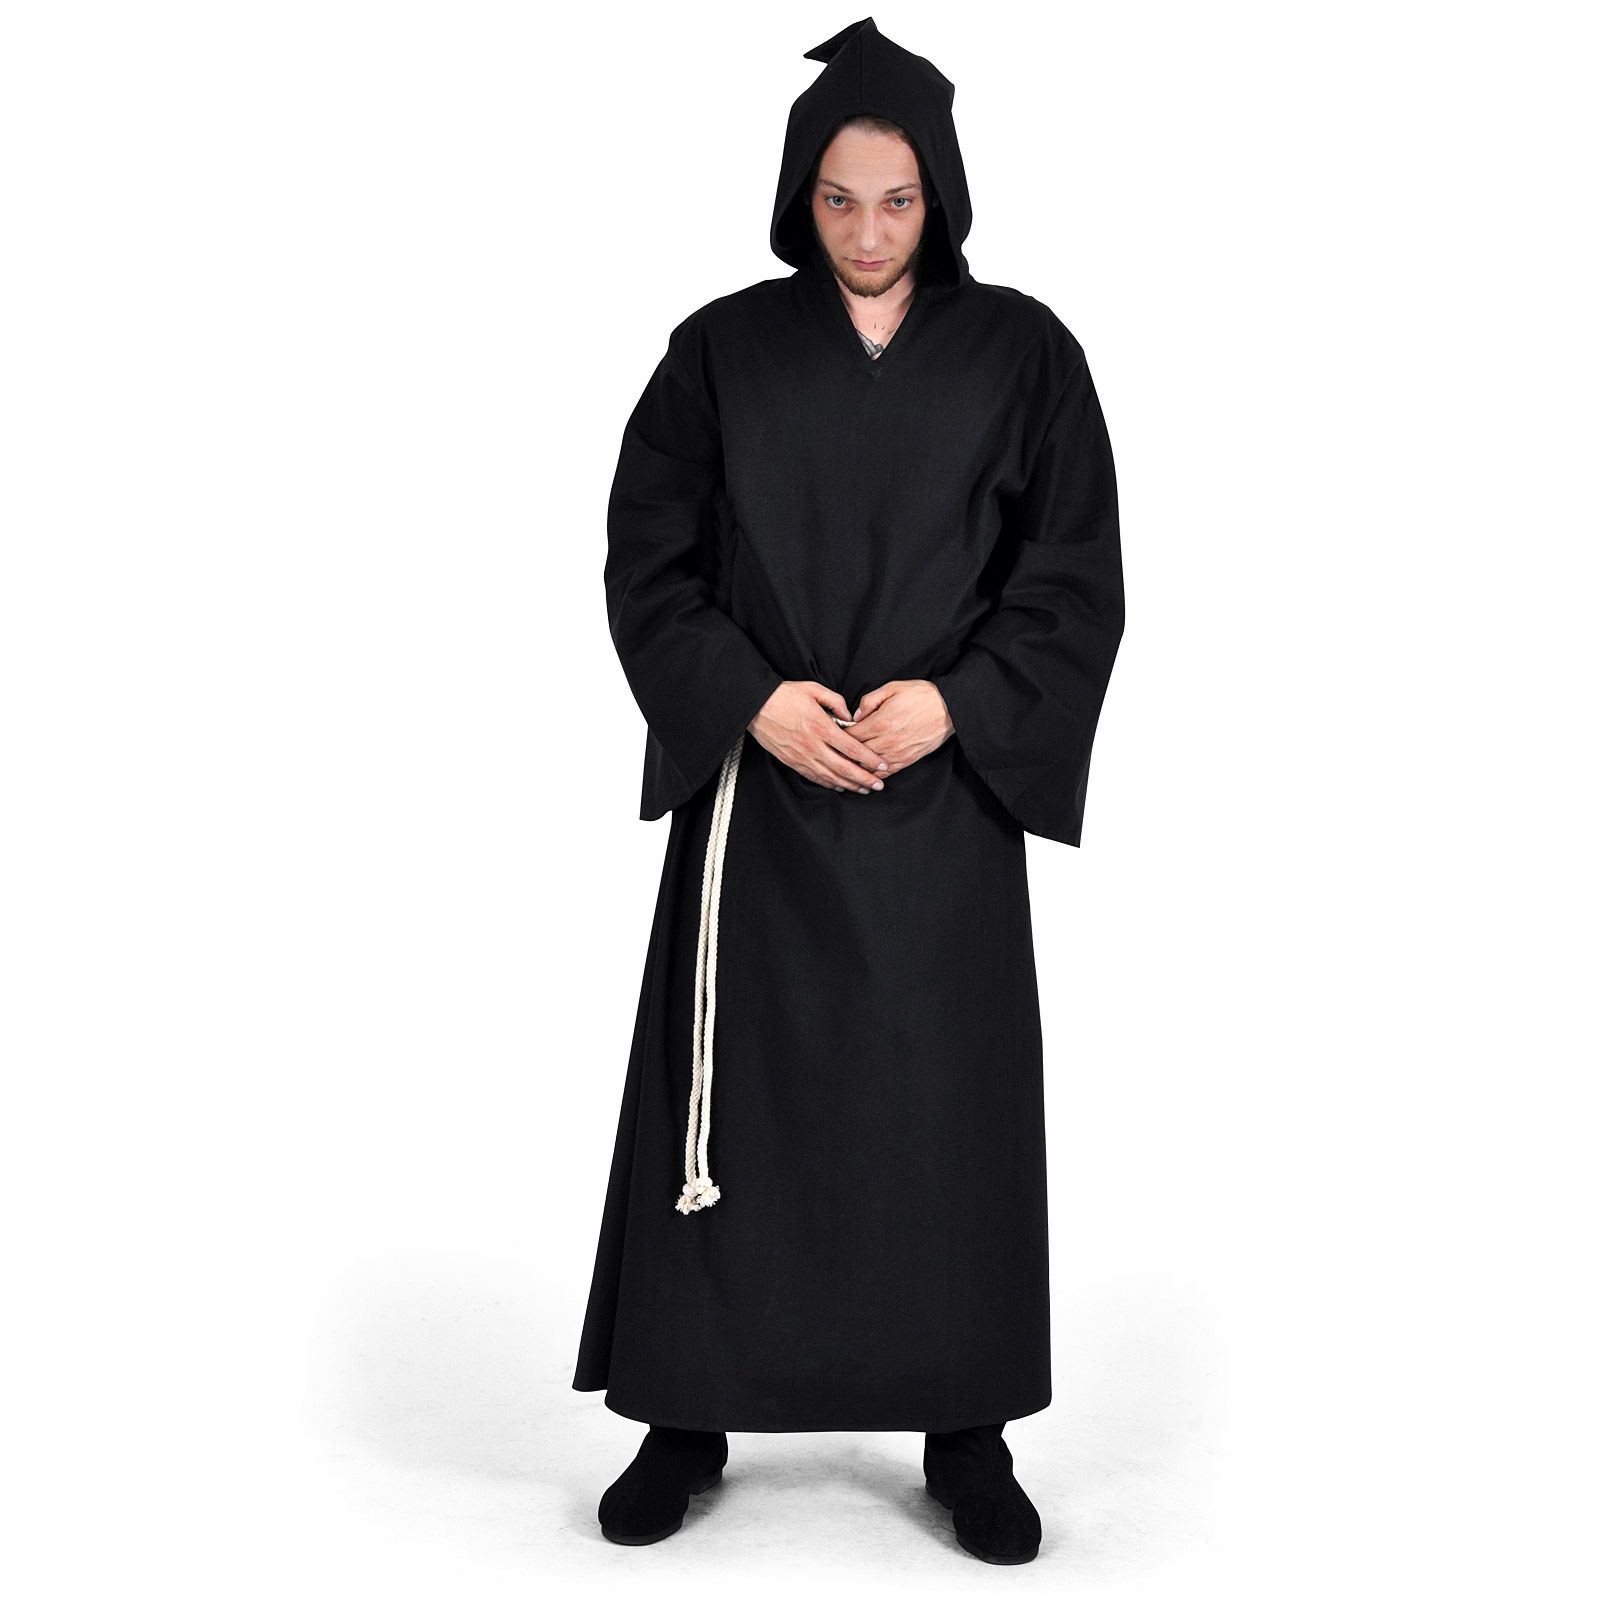 Monk's robe with cord black